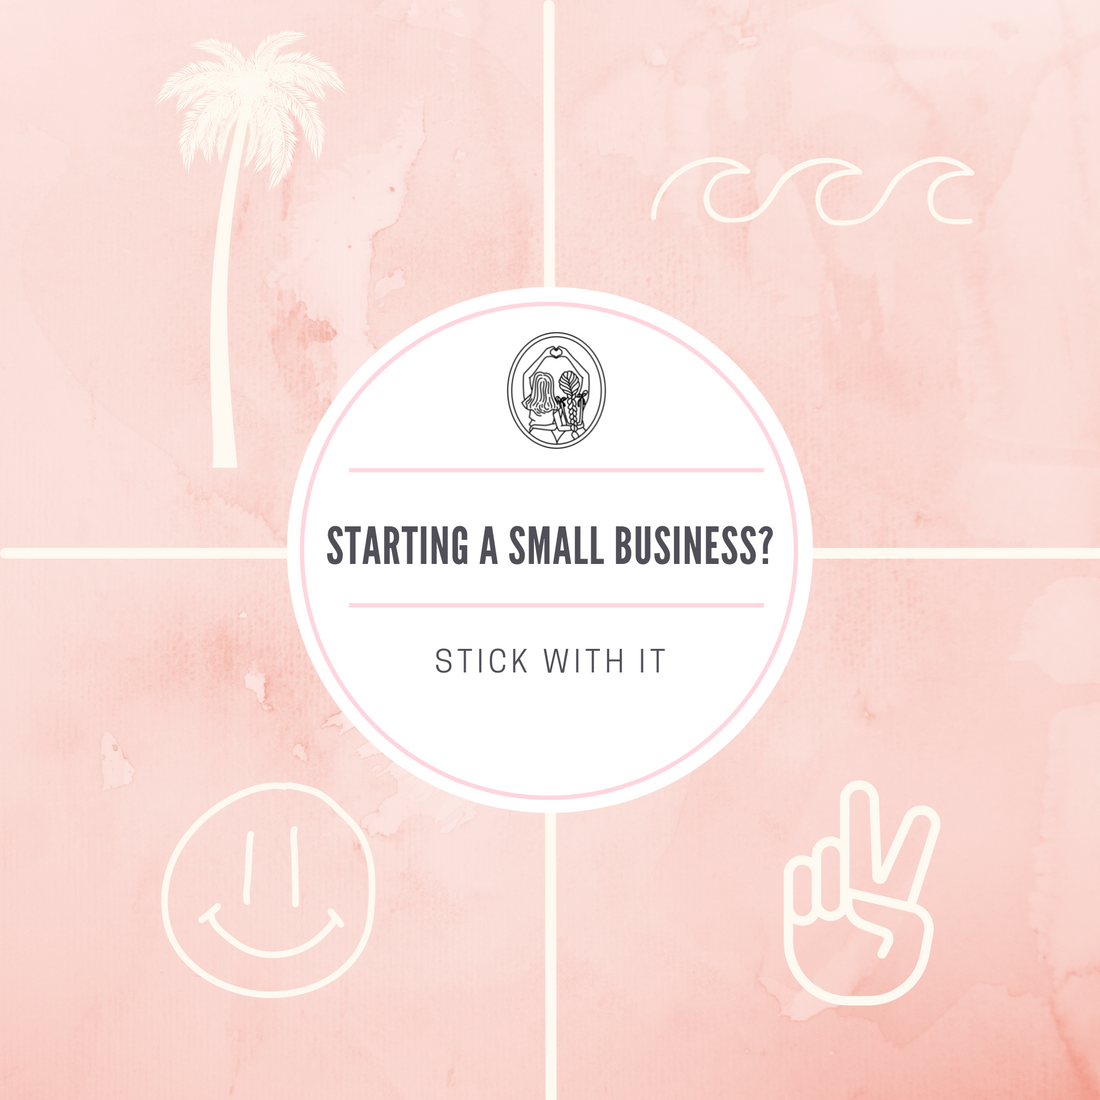 Starting a Small Business? Stick With It!